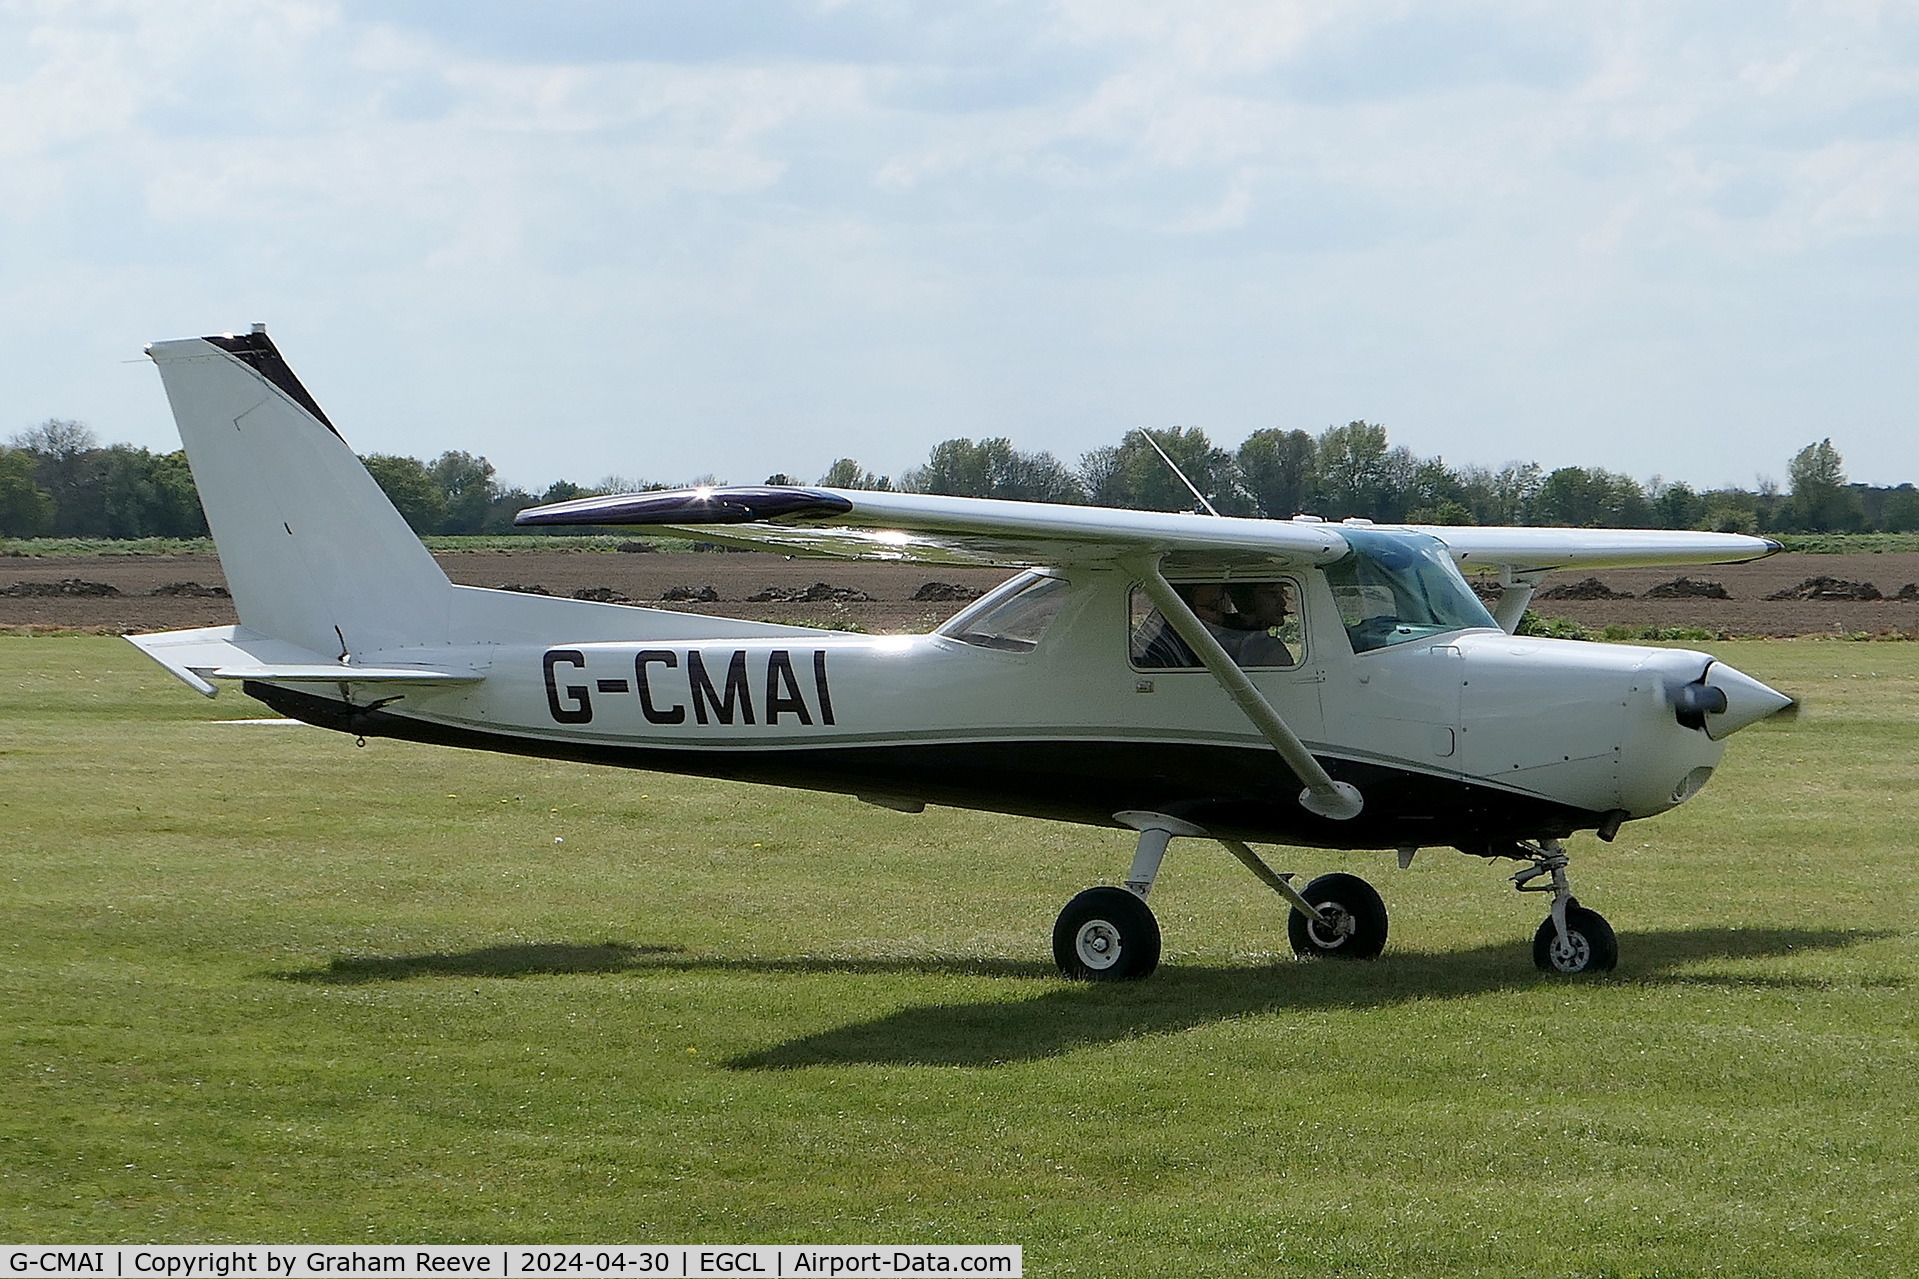 G-CMAI, 1977 Cessna 152 C/N 15280418, Departing from Fenland.